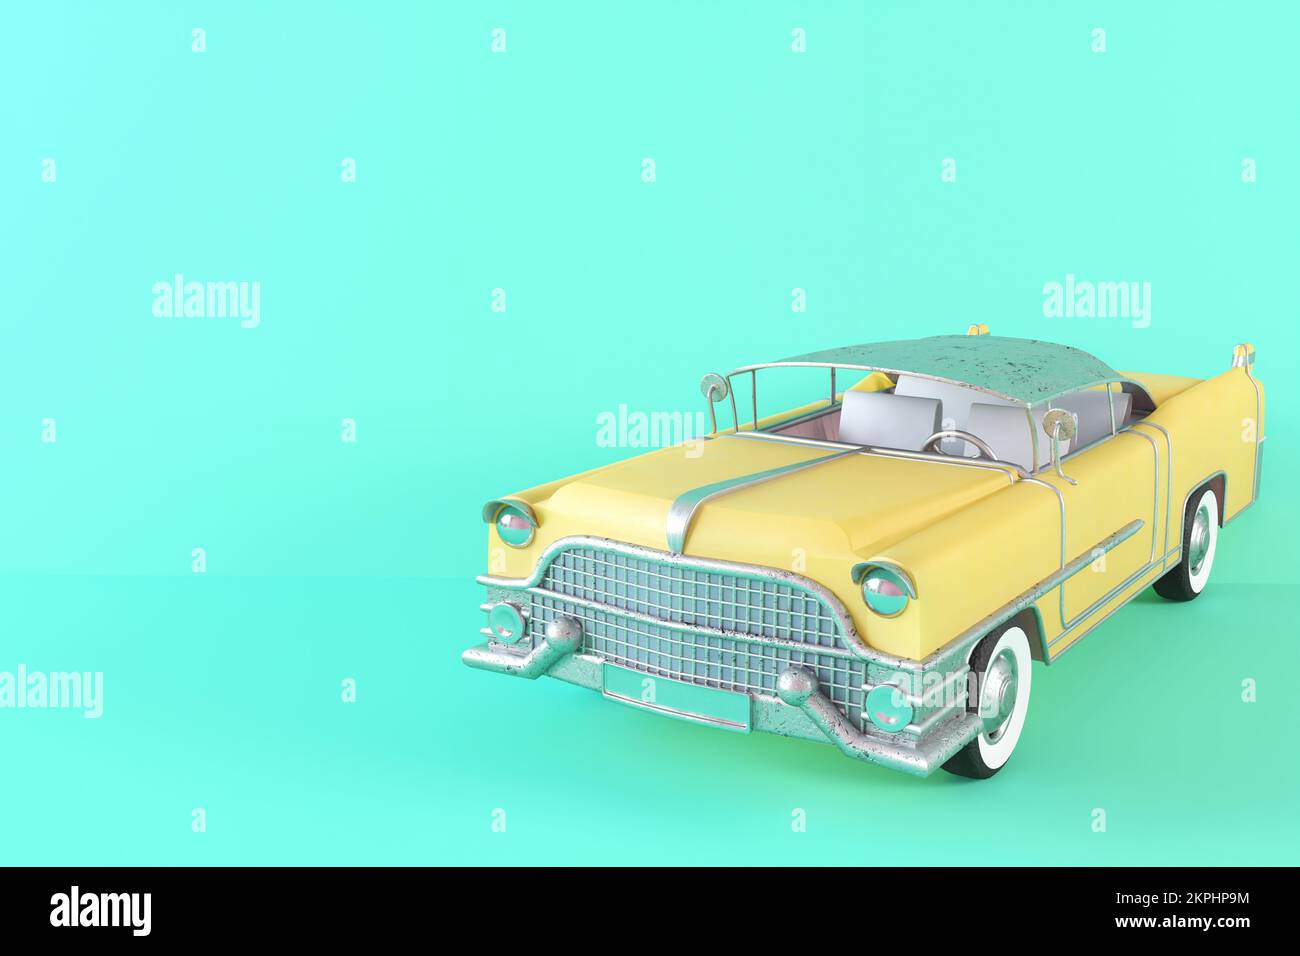 Vintage yellow toy car on green background 3D illustration. Scale model of retro car old green and yellow colors. Classic rare car. Stylized toy Stock Photo